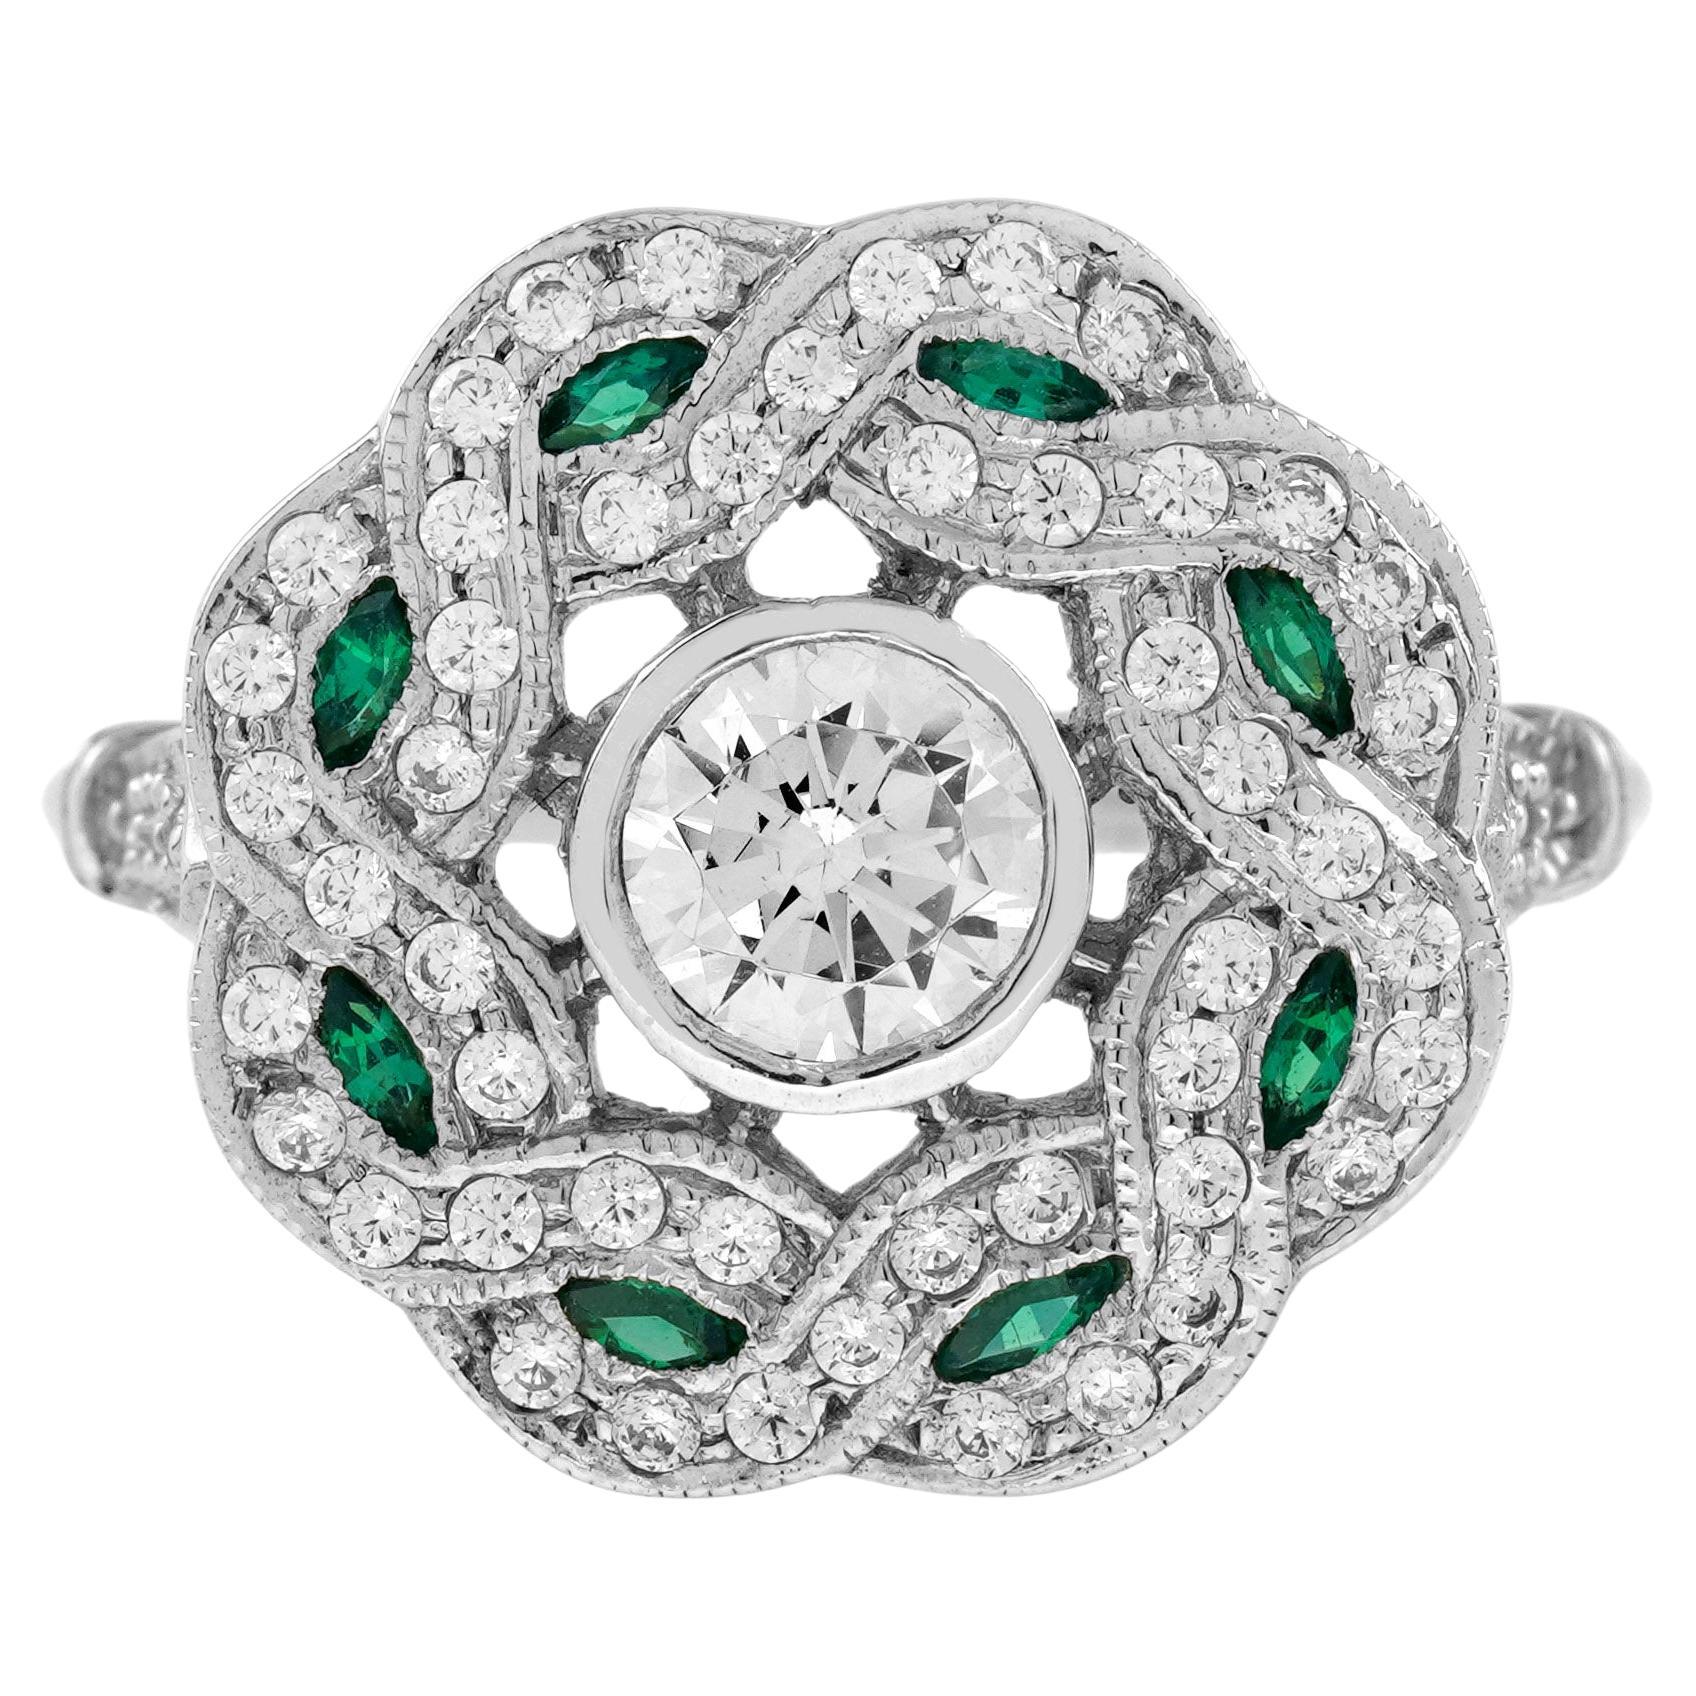 Diamond and Emerald Art Deco Style Curl Ring in 18K White Gold